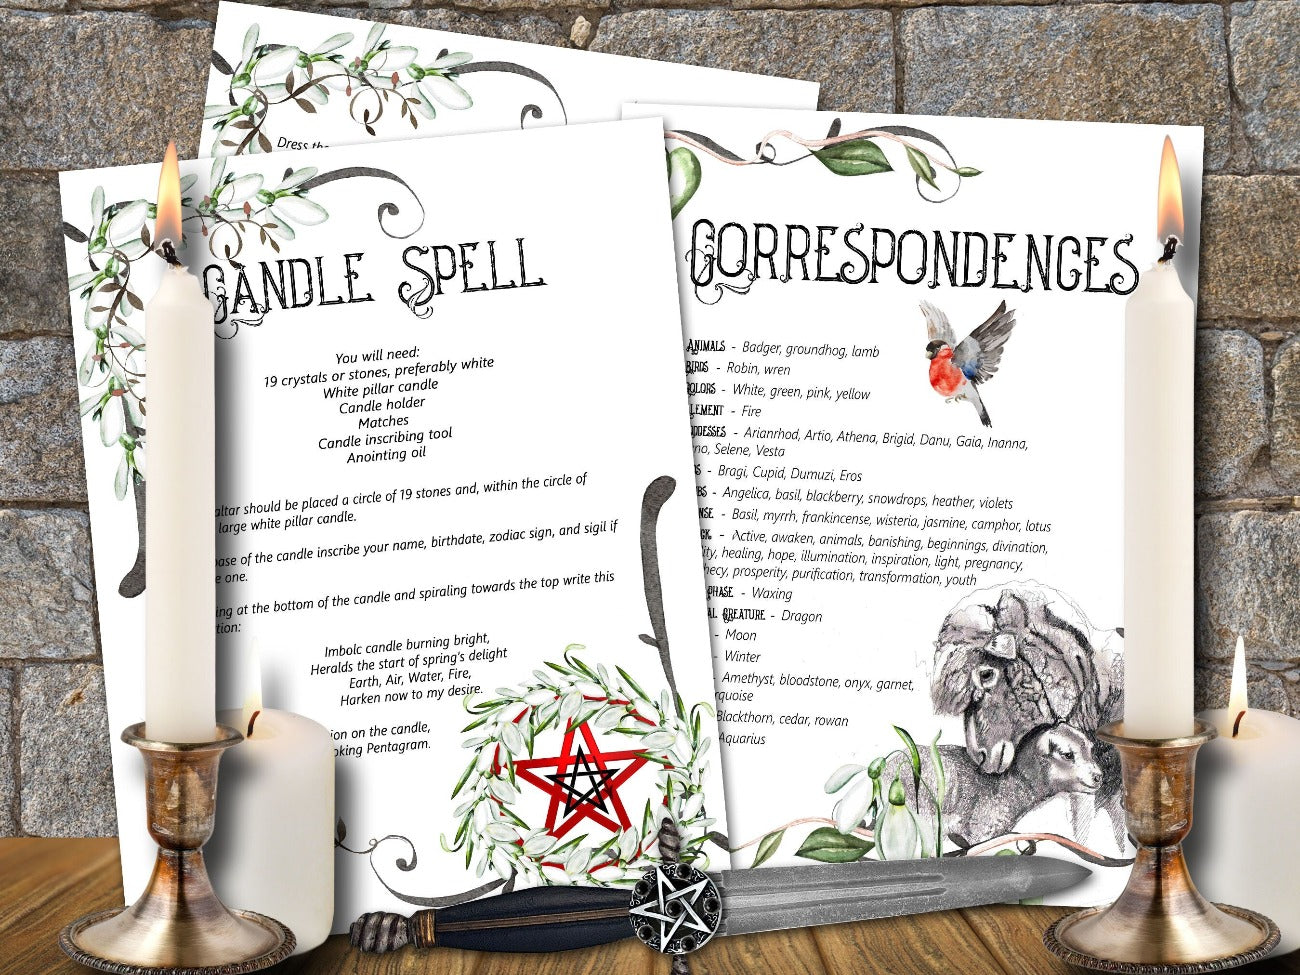 IMBOLC BUNDLE, Candle Spell 2 pages and Imbolc Correspondences page - Morgana Magick Spell